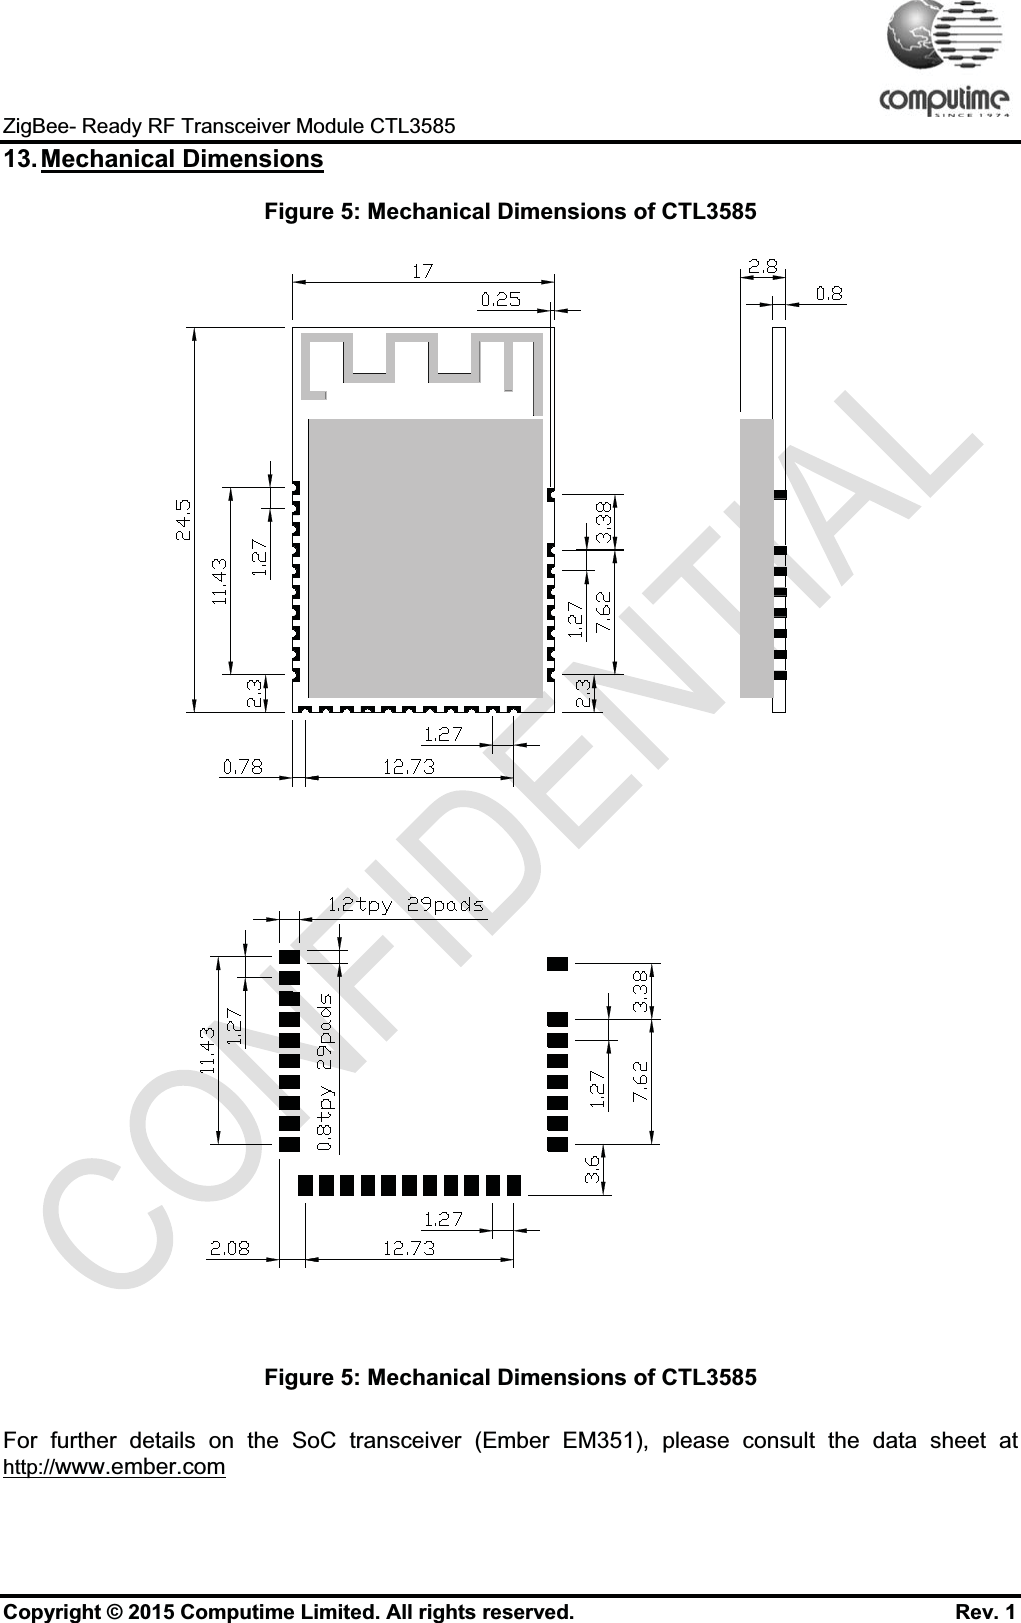 ZigBee- Ready RF Transceiver Module CTL358513.Mechanical DimensionsFigure 5: Mechanical Dimensions of CTL3585Figure 5: Mechanical Dimensions of CTL3585For further details on the SoC transceiver (Ember EM351), please consult the data sheet at http://www.ember.comCopyright © 2015 Computime Limited. All rights reserved.                                                      Rev. 1